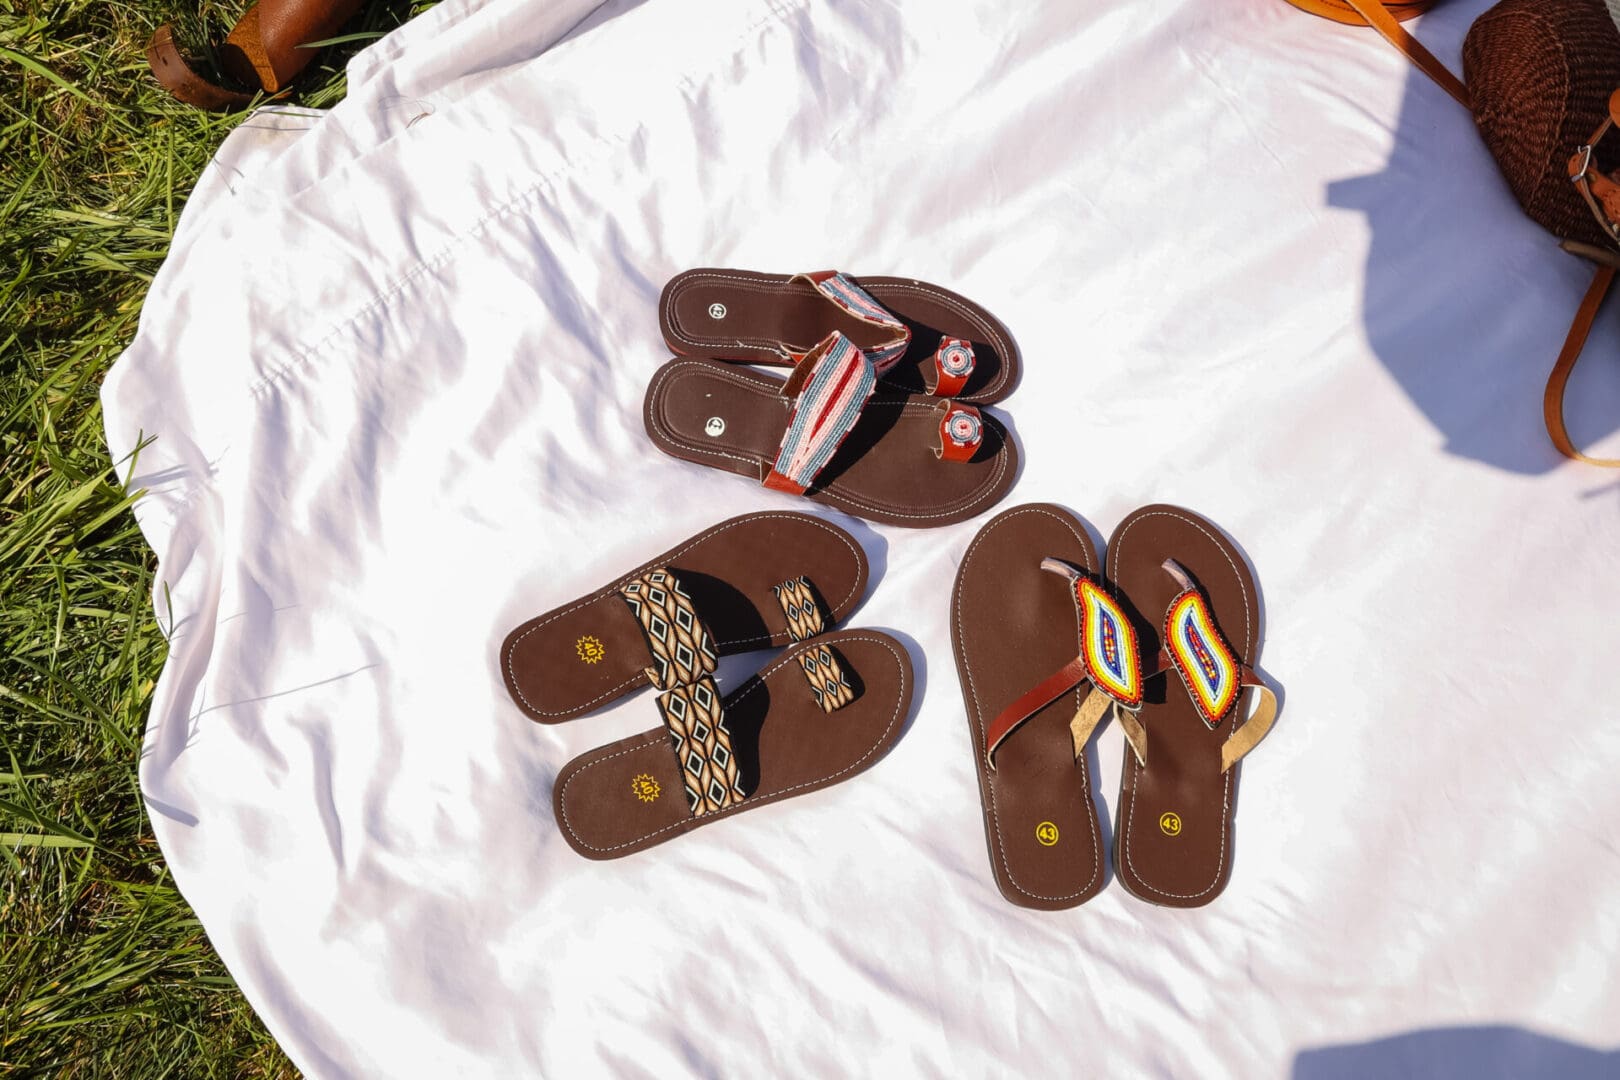 Three pairs of sandals are laying on a bed.